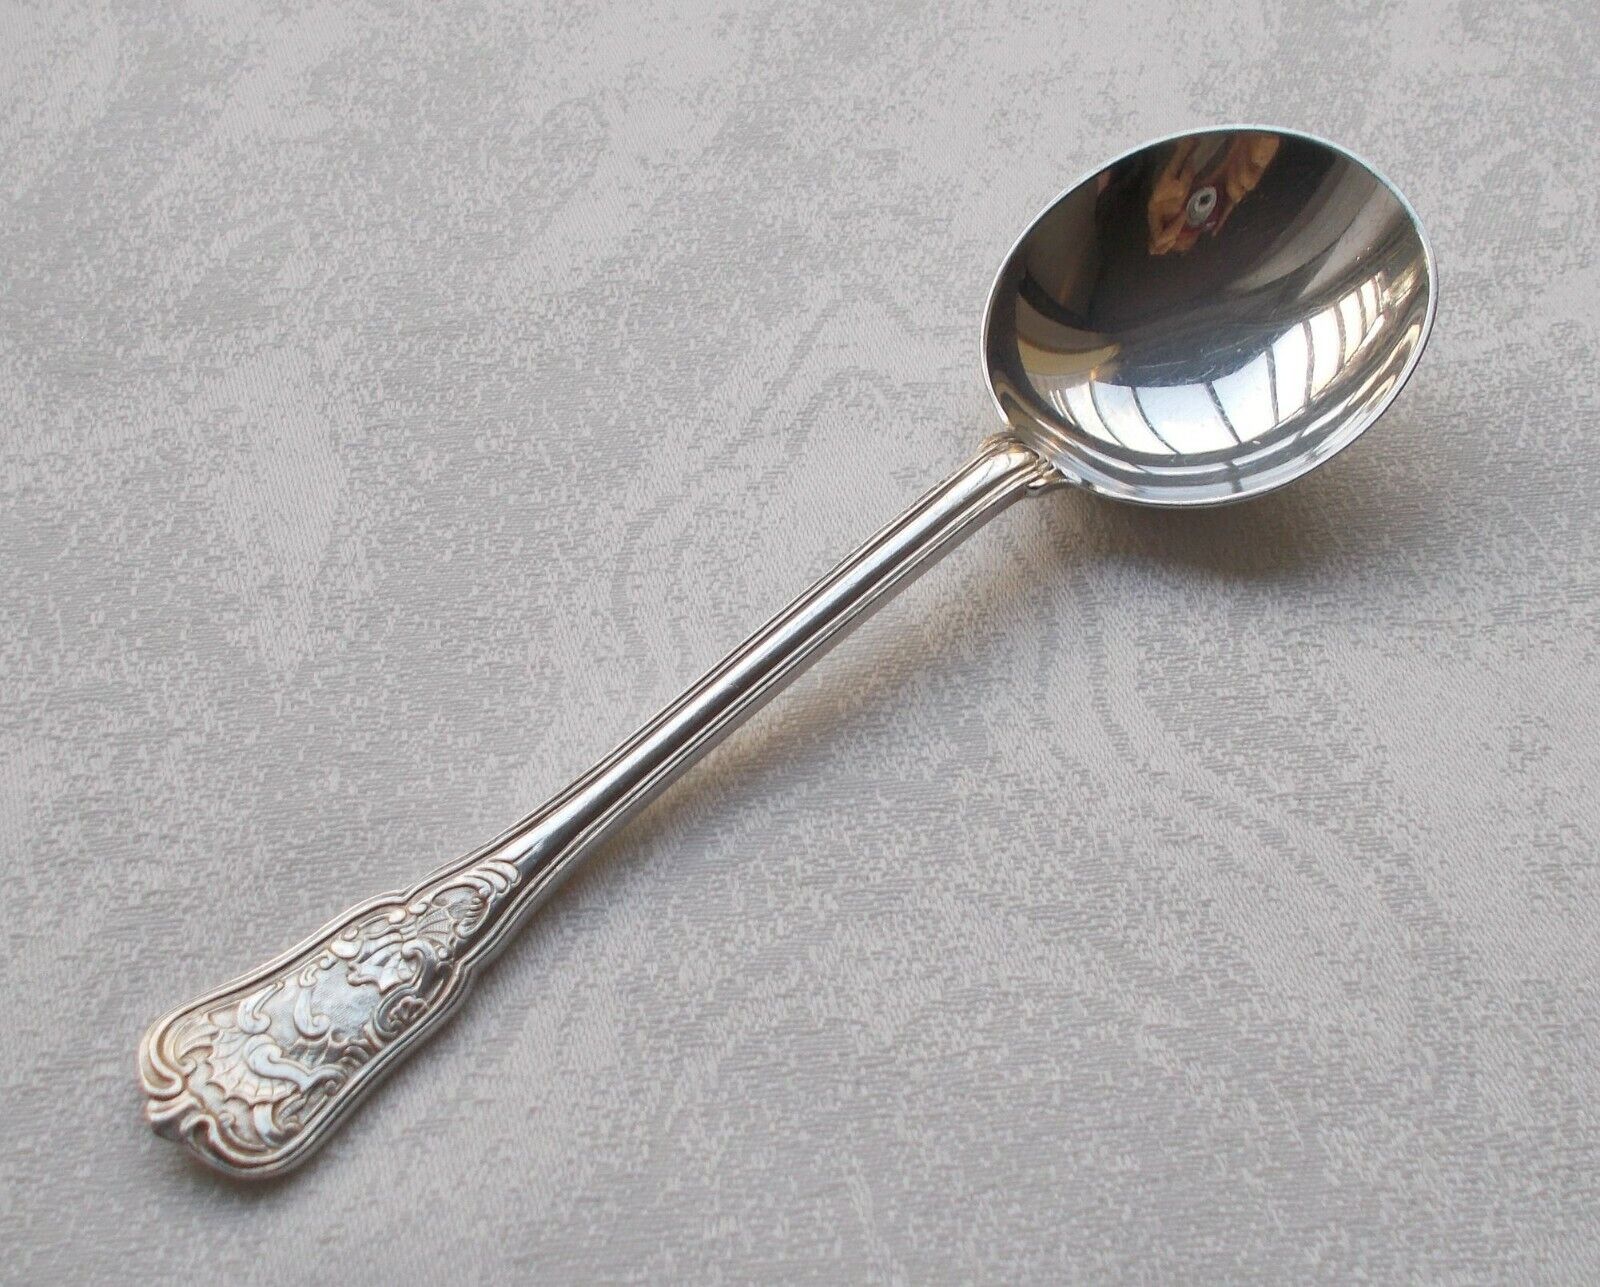 Rare Spoon Decor With Rocaille 925er Sterling Silver From Norway